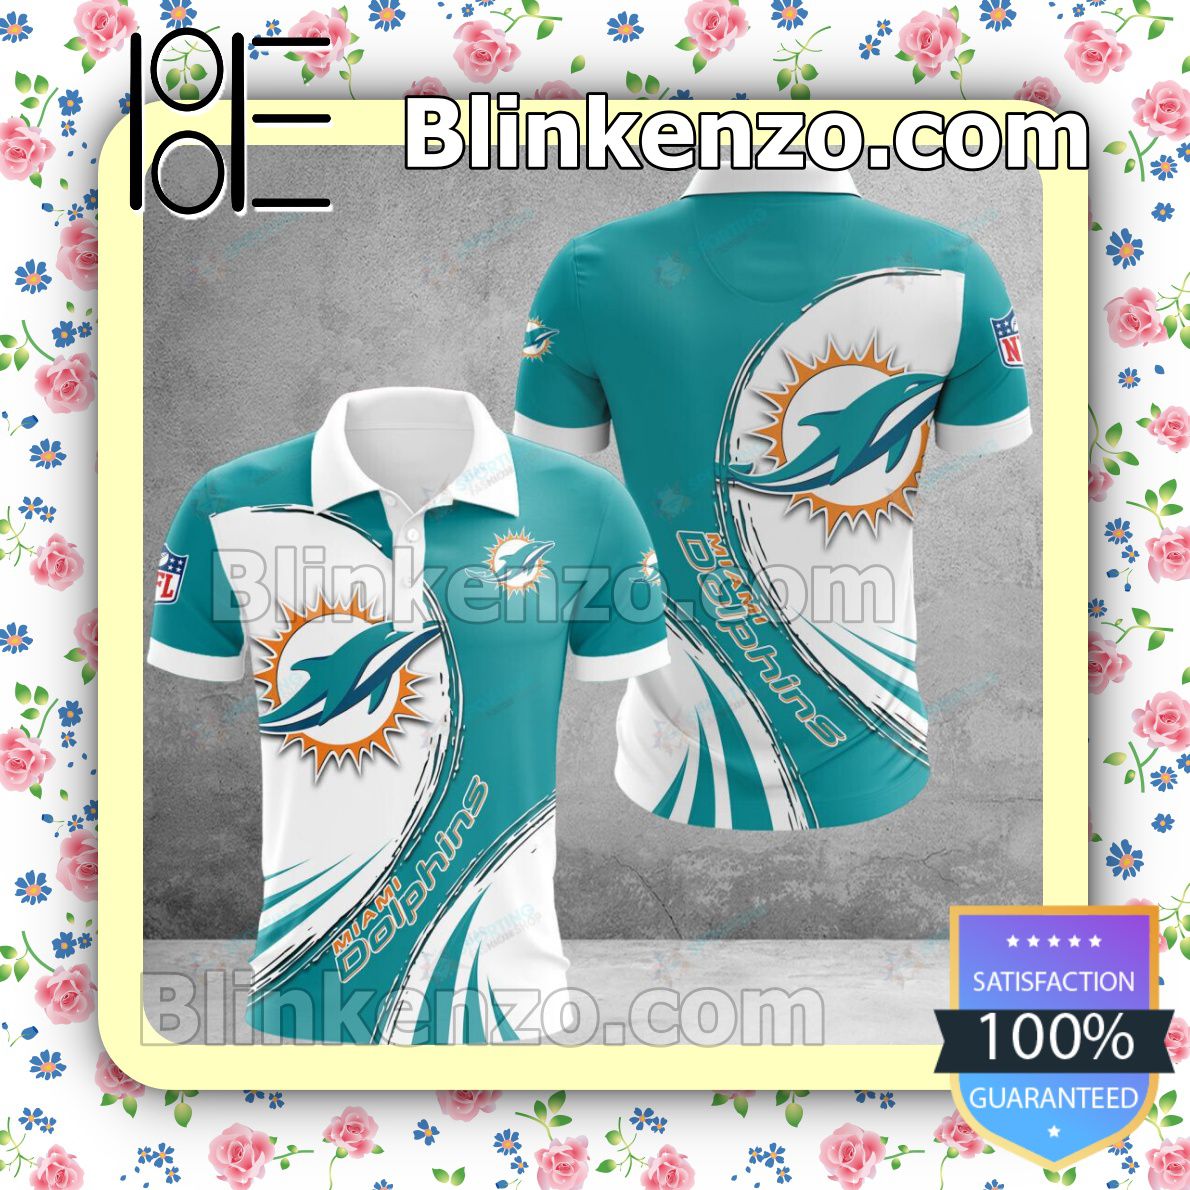 Miami Dolphins T-shirt, Christmas Sweater